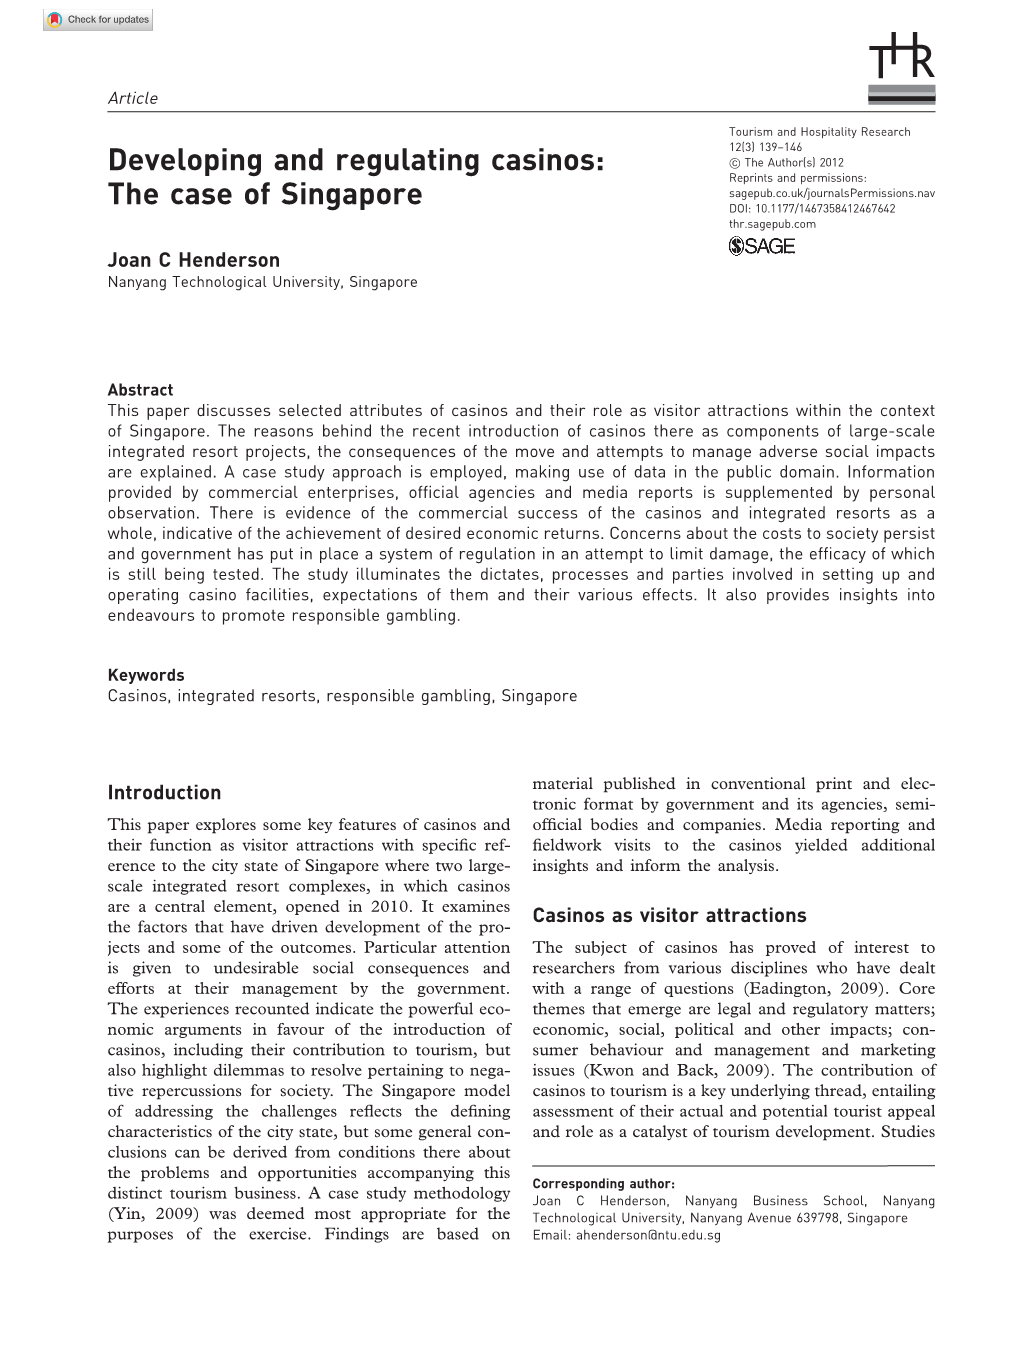 Developing and Regulating Casinos: the Case of Singapore